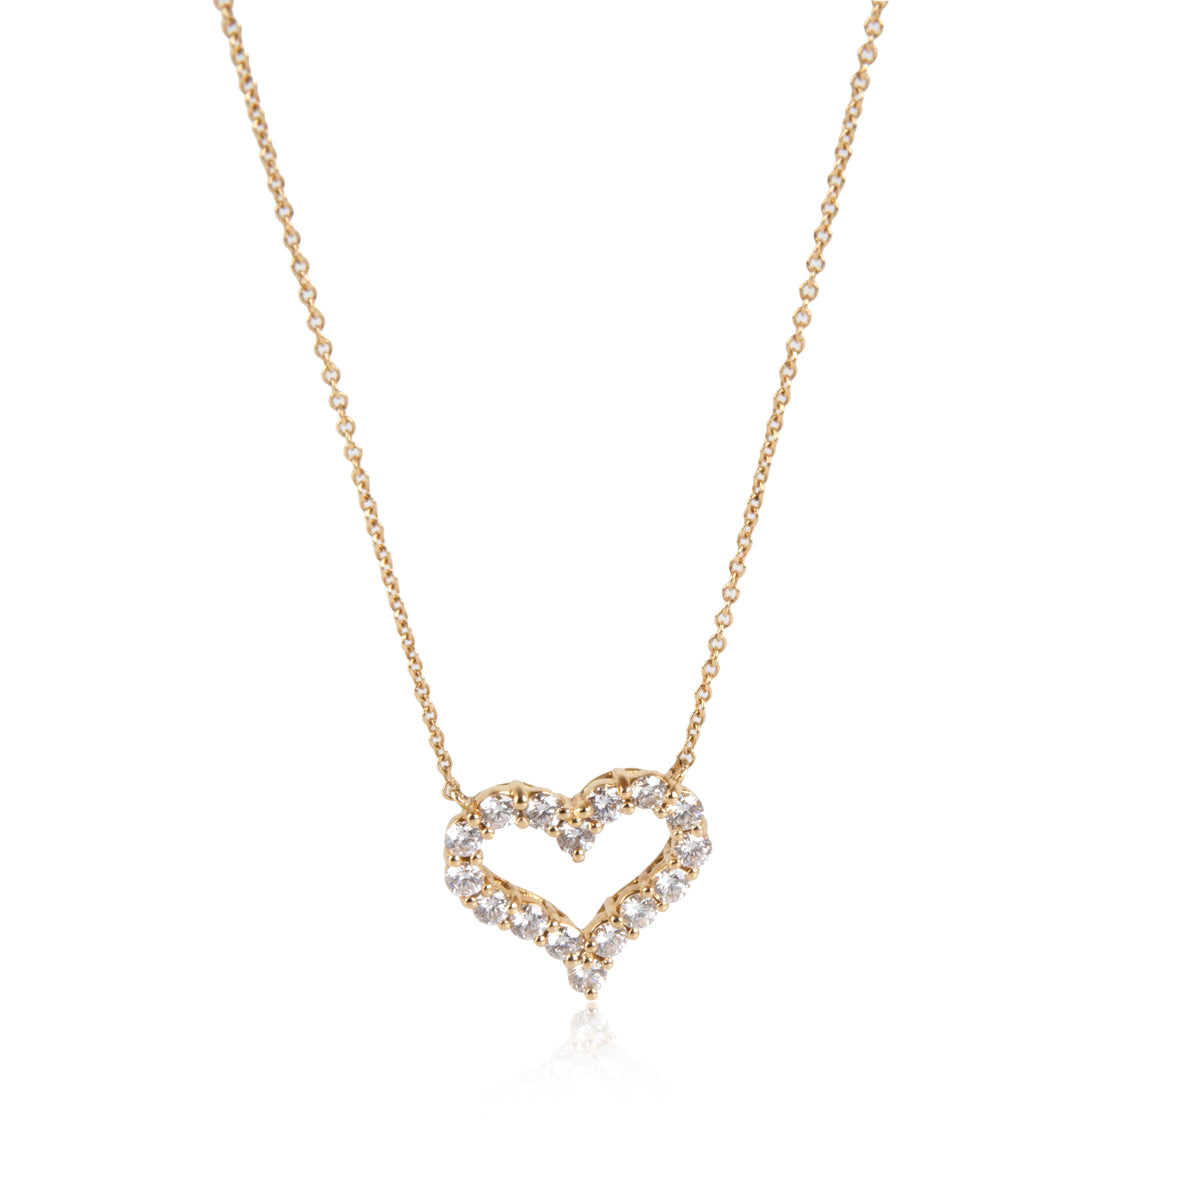 Tiffany & Co. Diamond Heart Necklace in 18K Yellow Gold 0.70 CTW